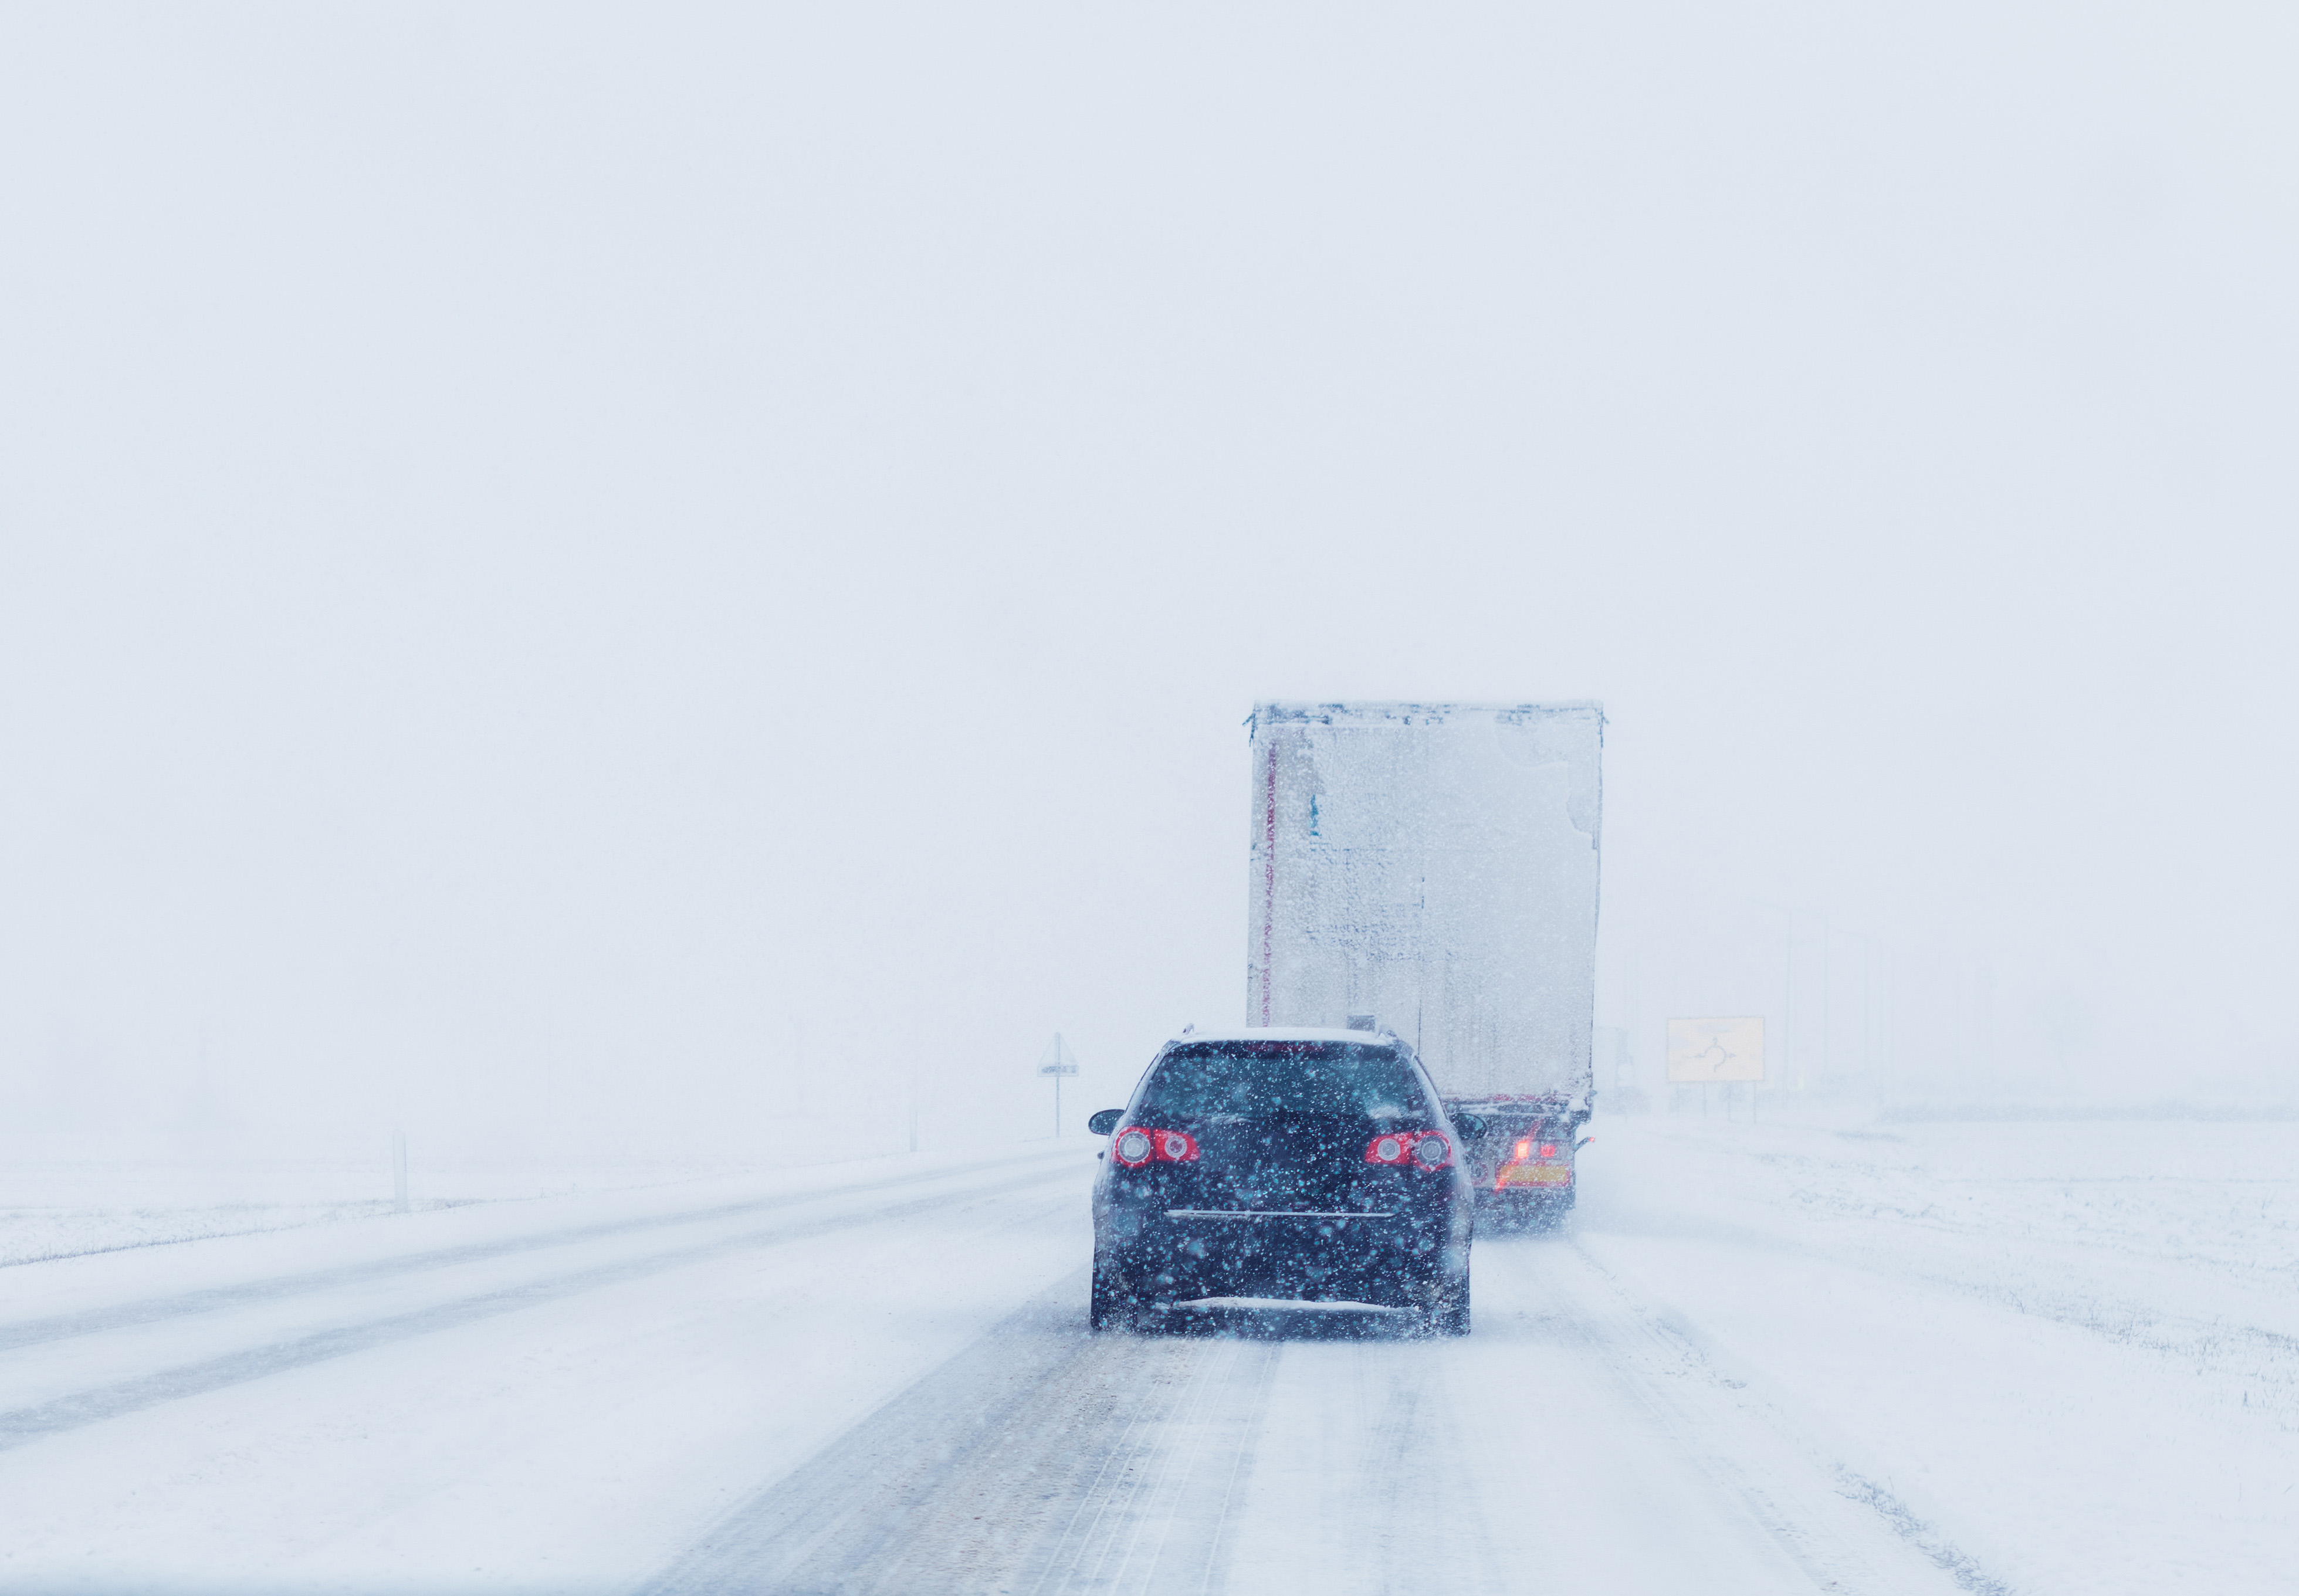 Vehicles driving on a snowy road in poor visibility conditions